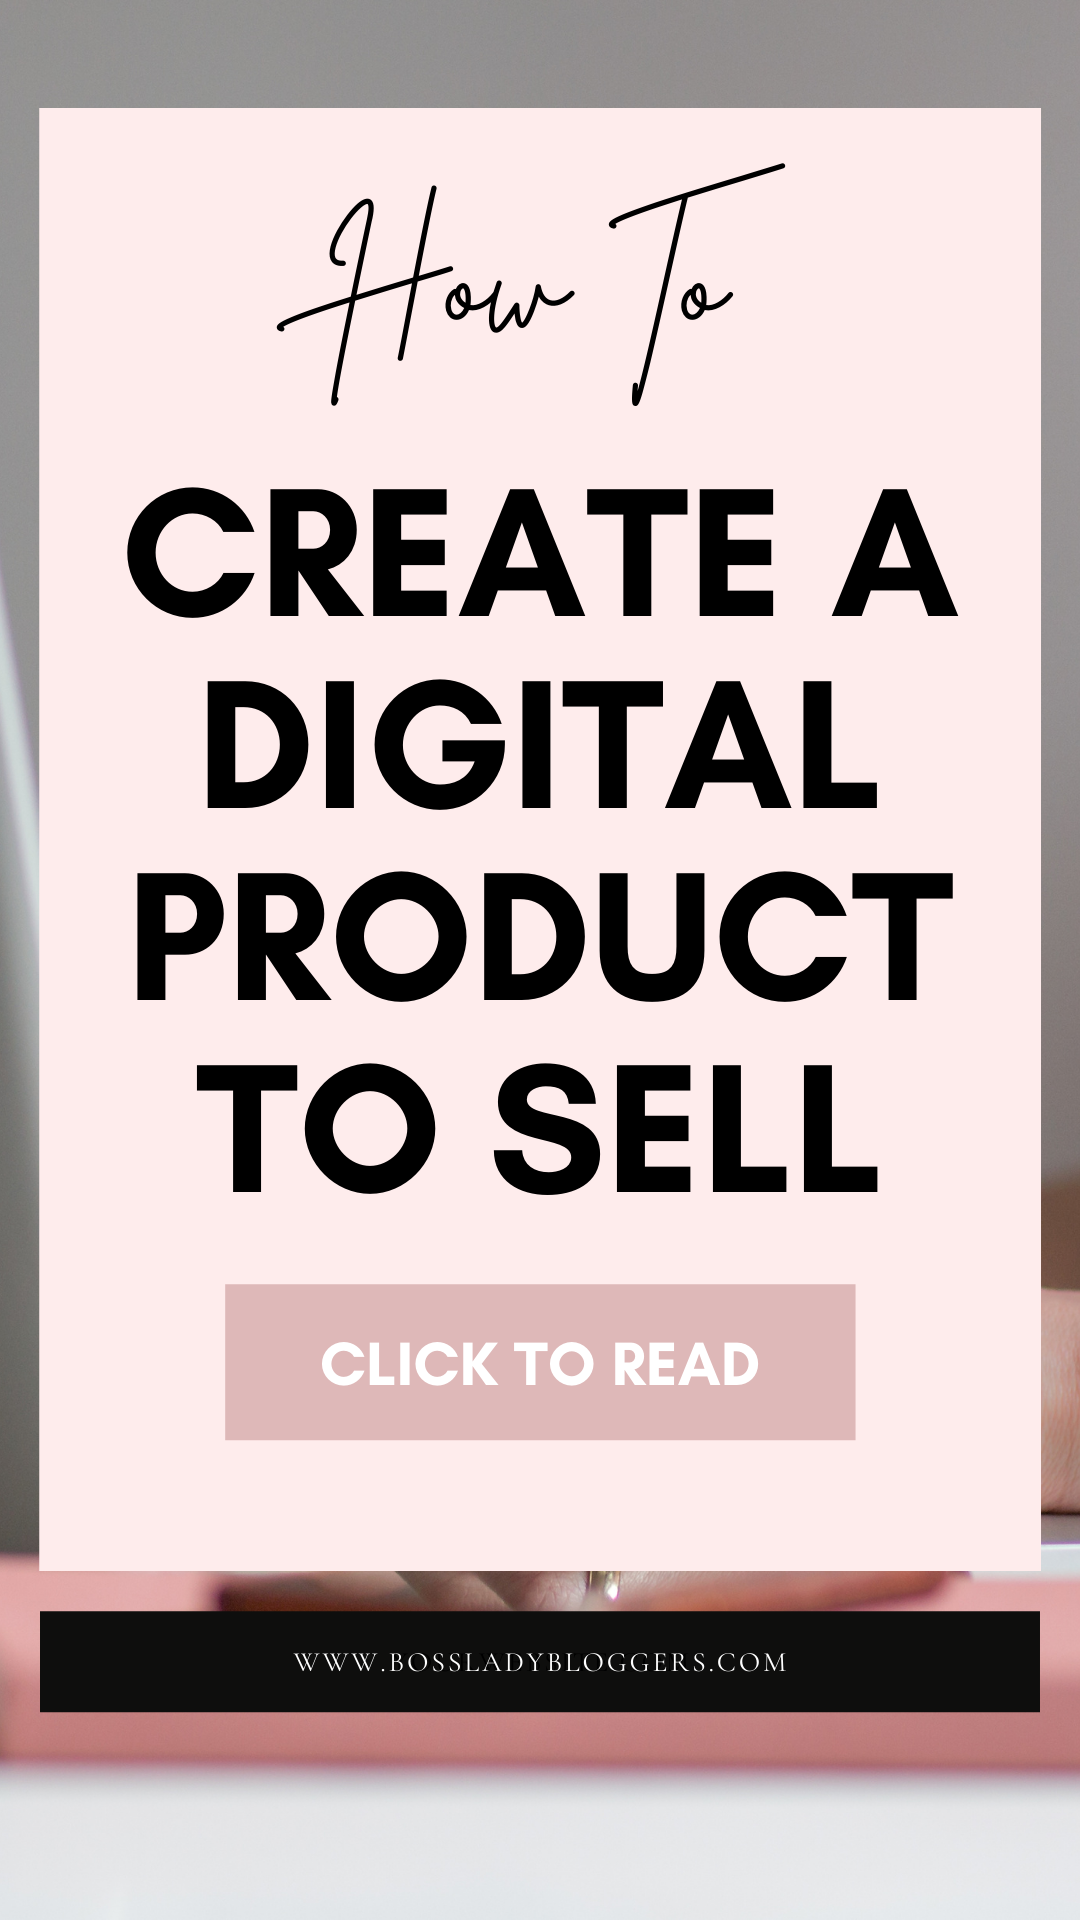 HOW TO SUCCESSFULLY CREATE A DIGITAL PRODUCT TO SELL - bossladybloggers.com